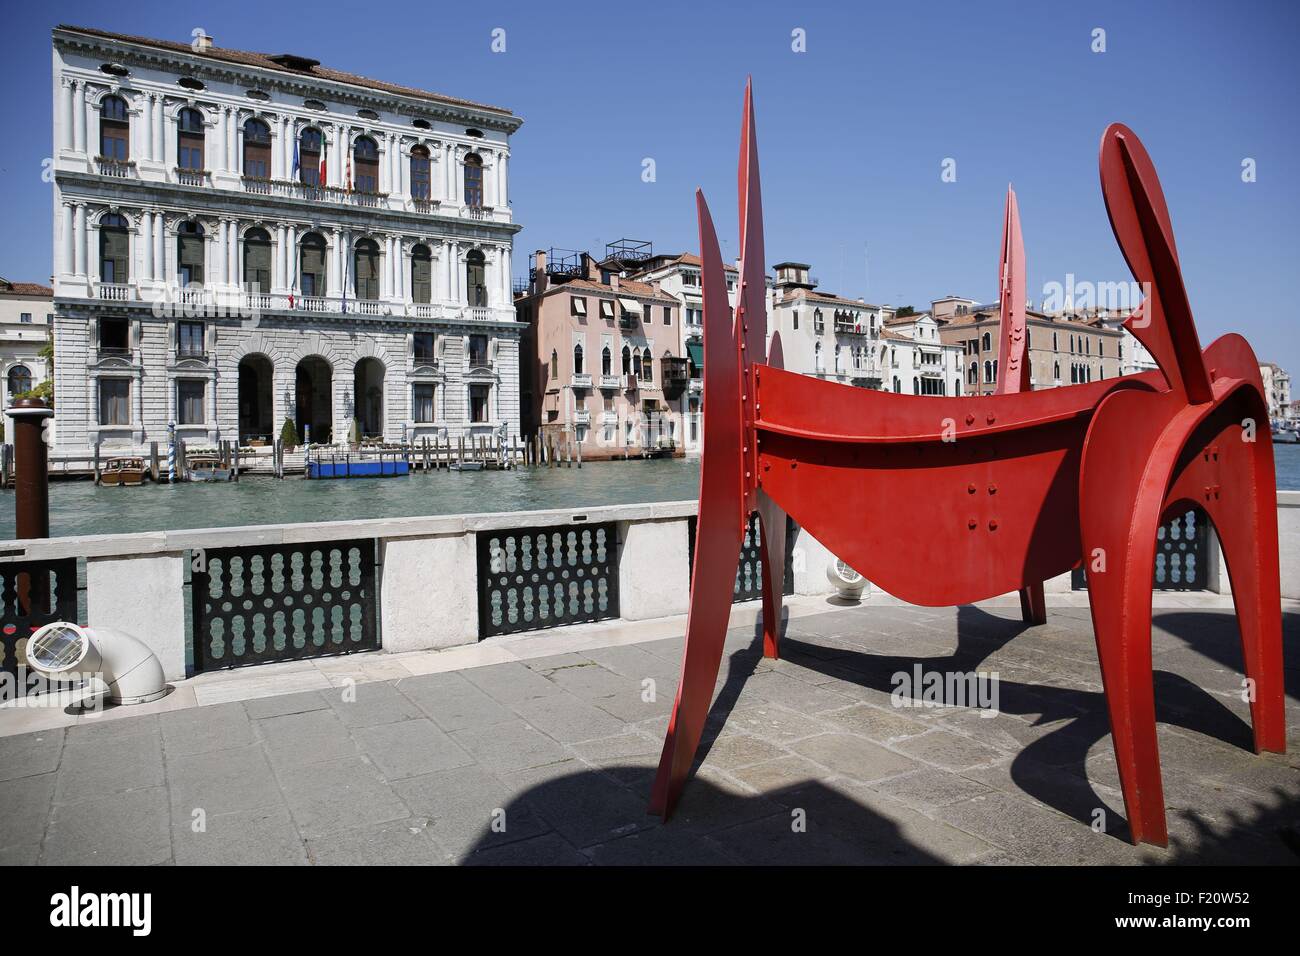 Italy, Venice, Peggy Guggenheim Collection in Palazzo Venier dei Leoni and Pollock exhibition during the Biennale 2015, sculpture by Calder Stock Photo